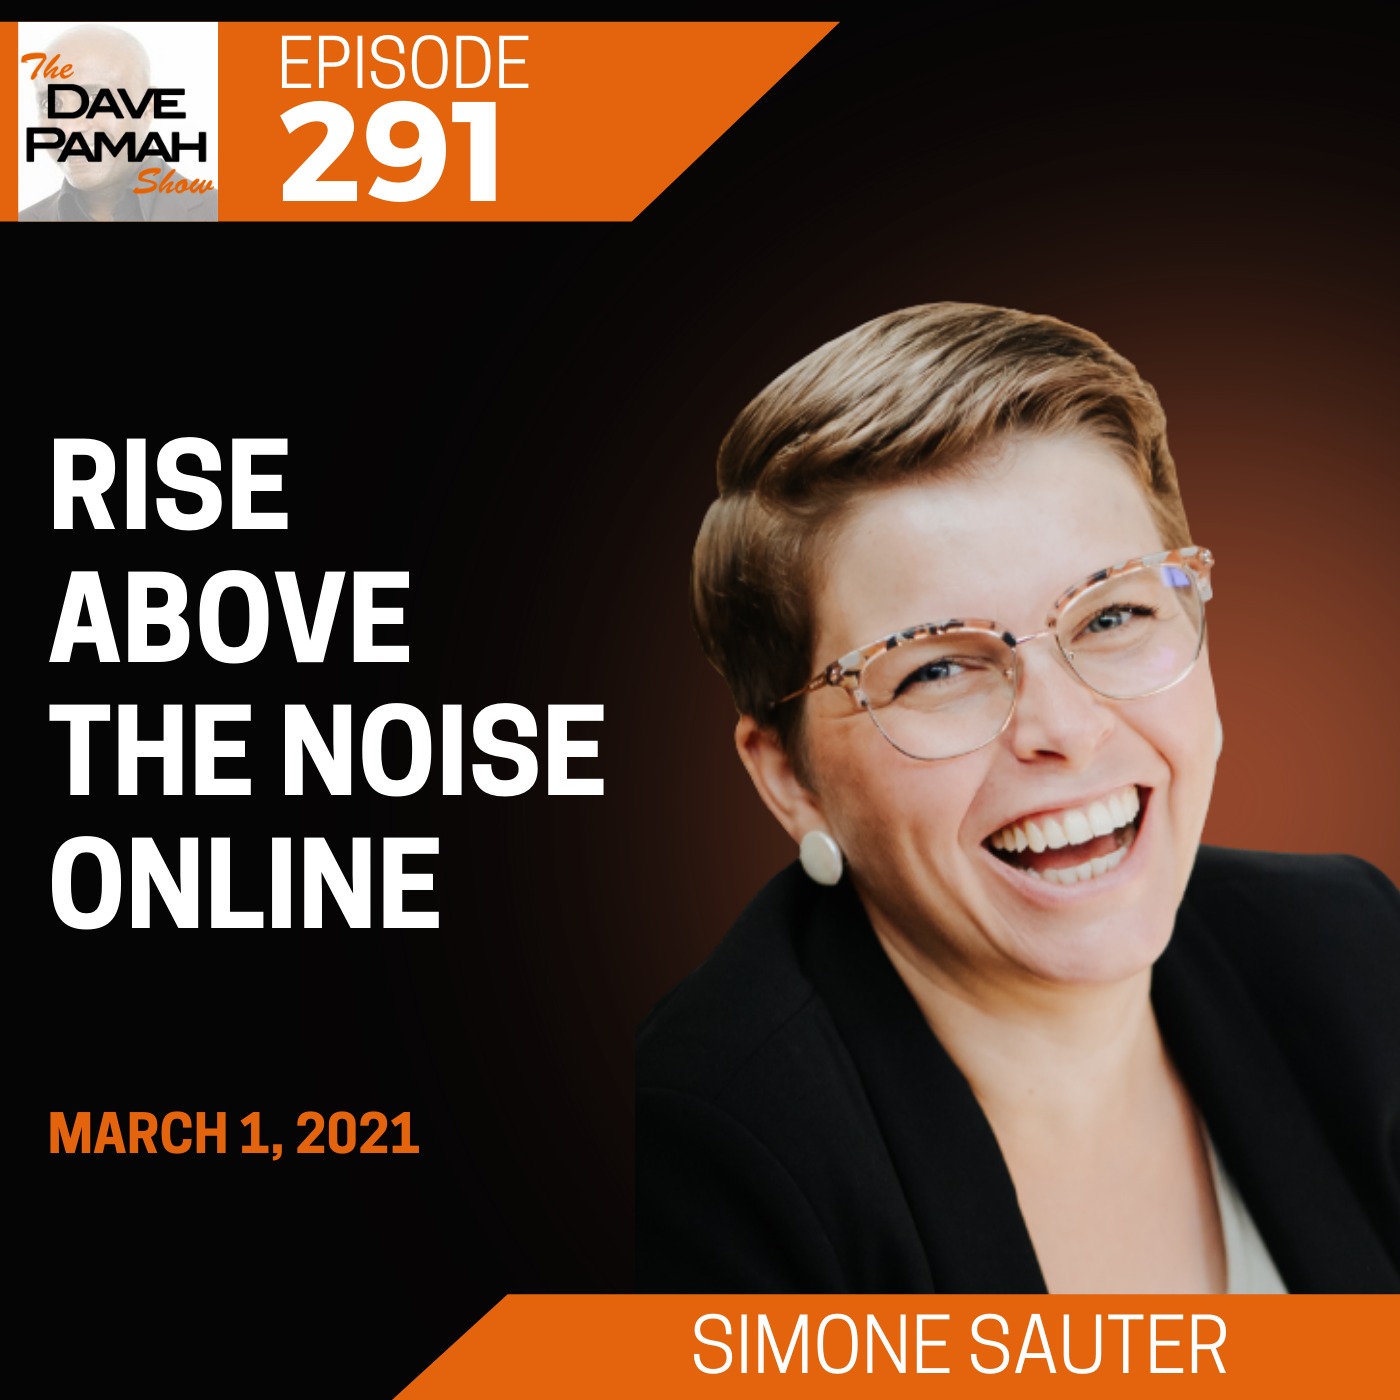 Rise above the noise online with Simone Sauter